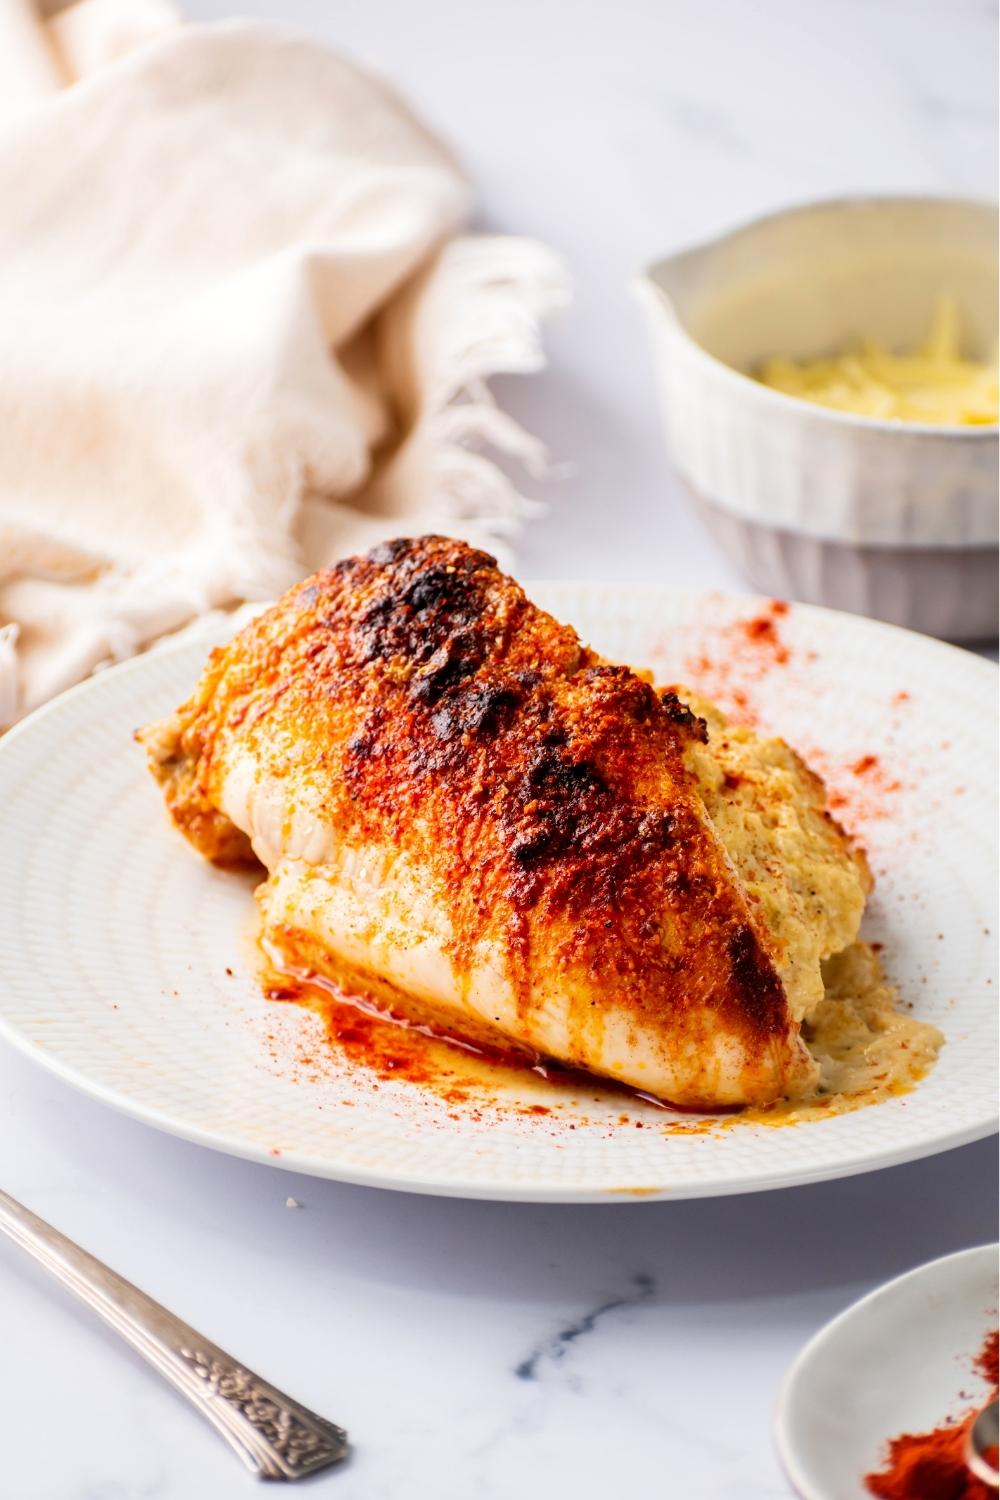 A stuffed chicken breast on a white plate. Behind it is part of a white bowl filled with cheddar cheese.